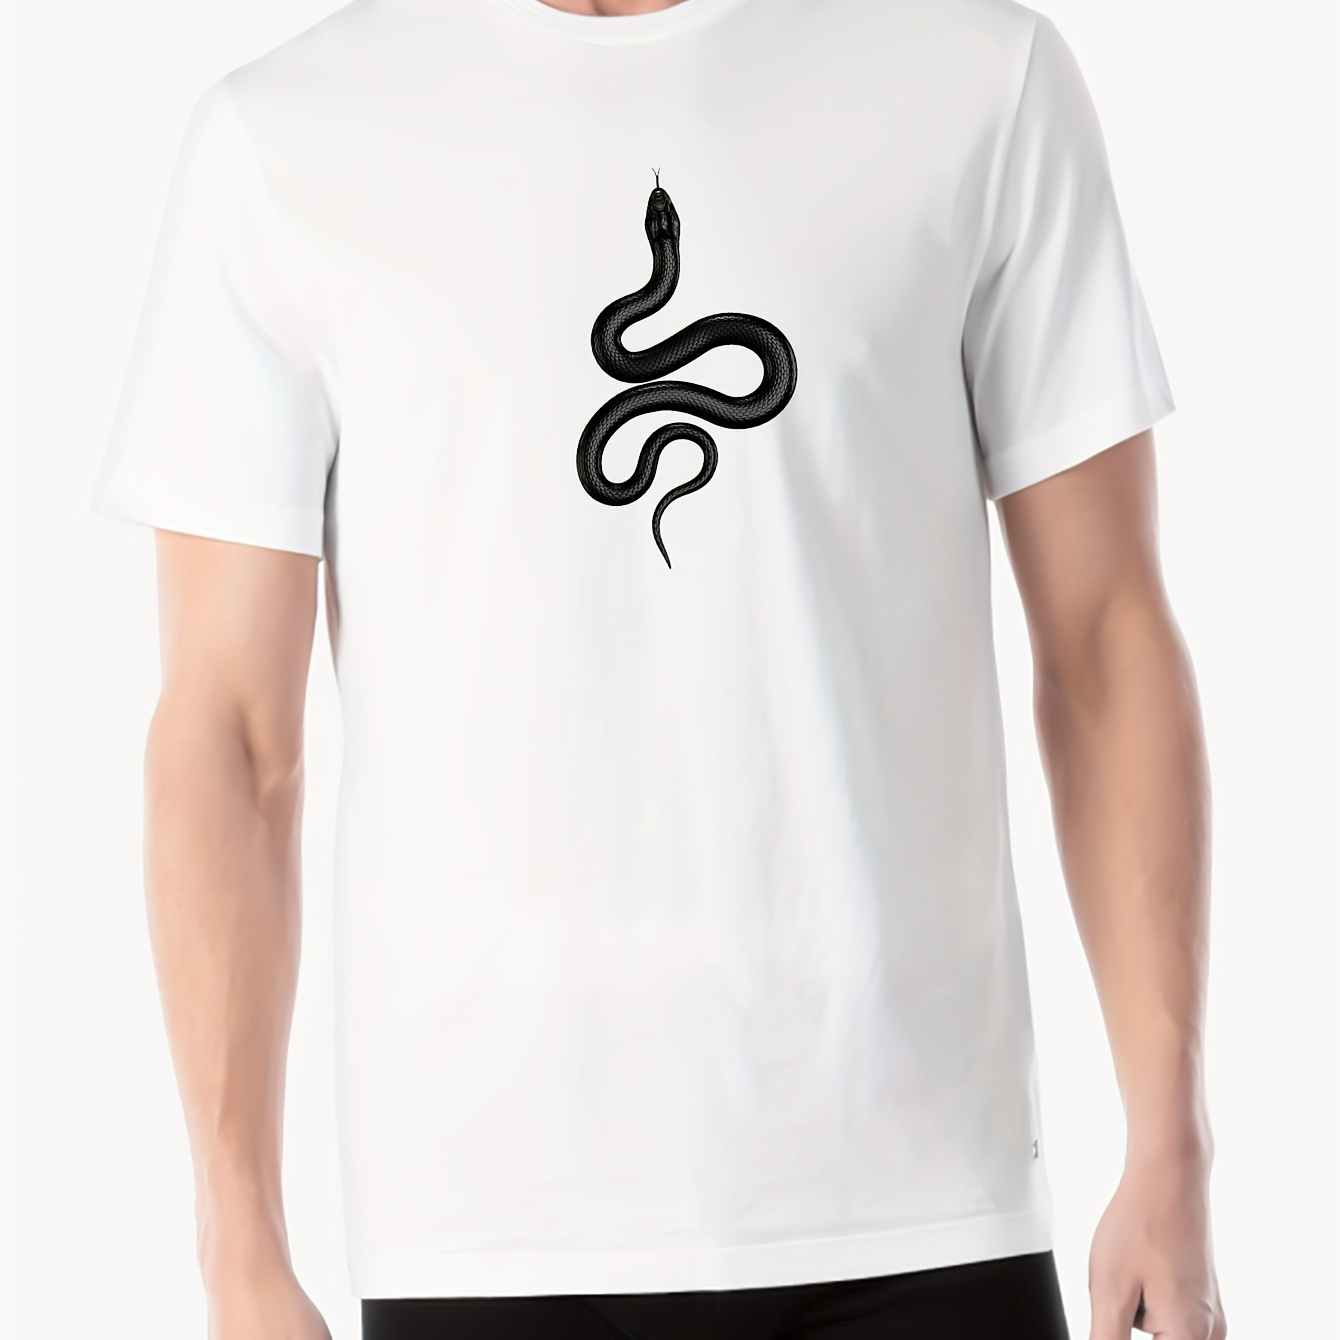 

Men's Casual Outdoor Loose Short Sleeve Cotton T-shirt With Stylish Scary Snake Silhouette Graphic Print, Comfort Fit For Daily Wear